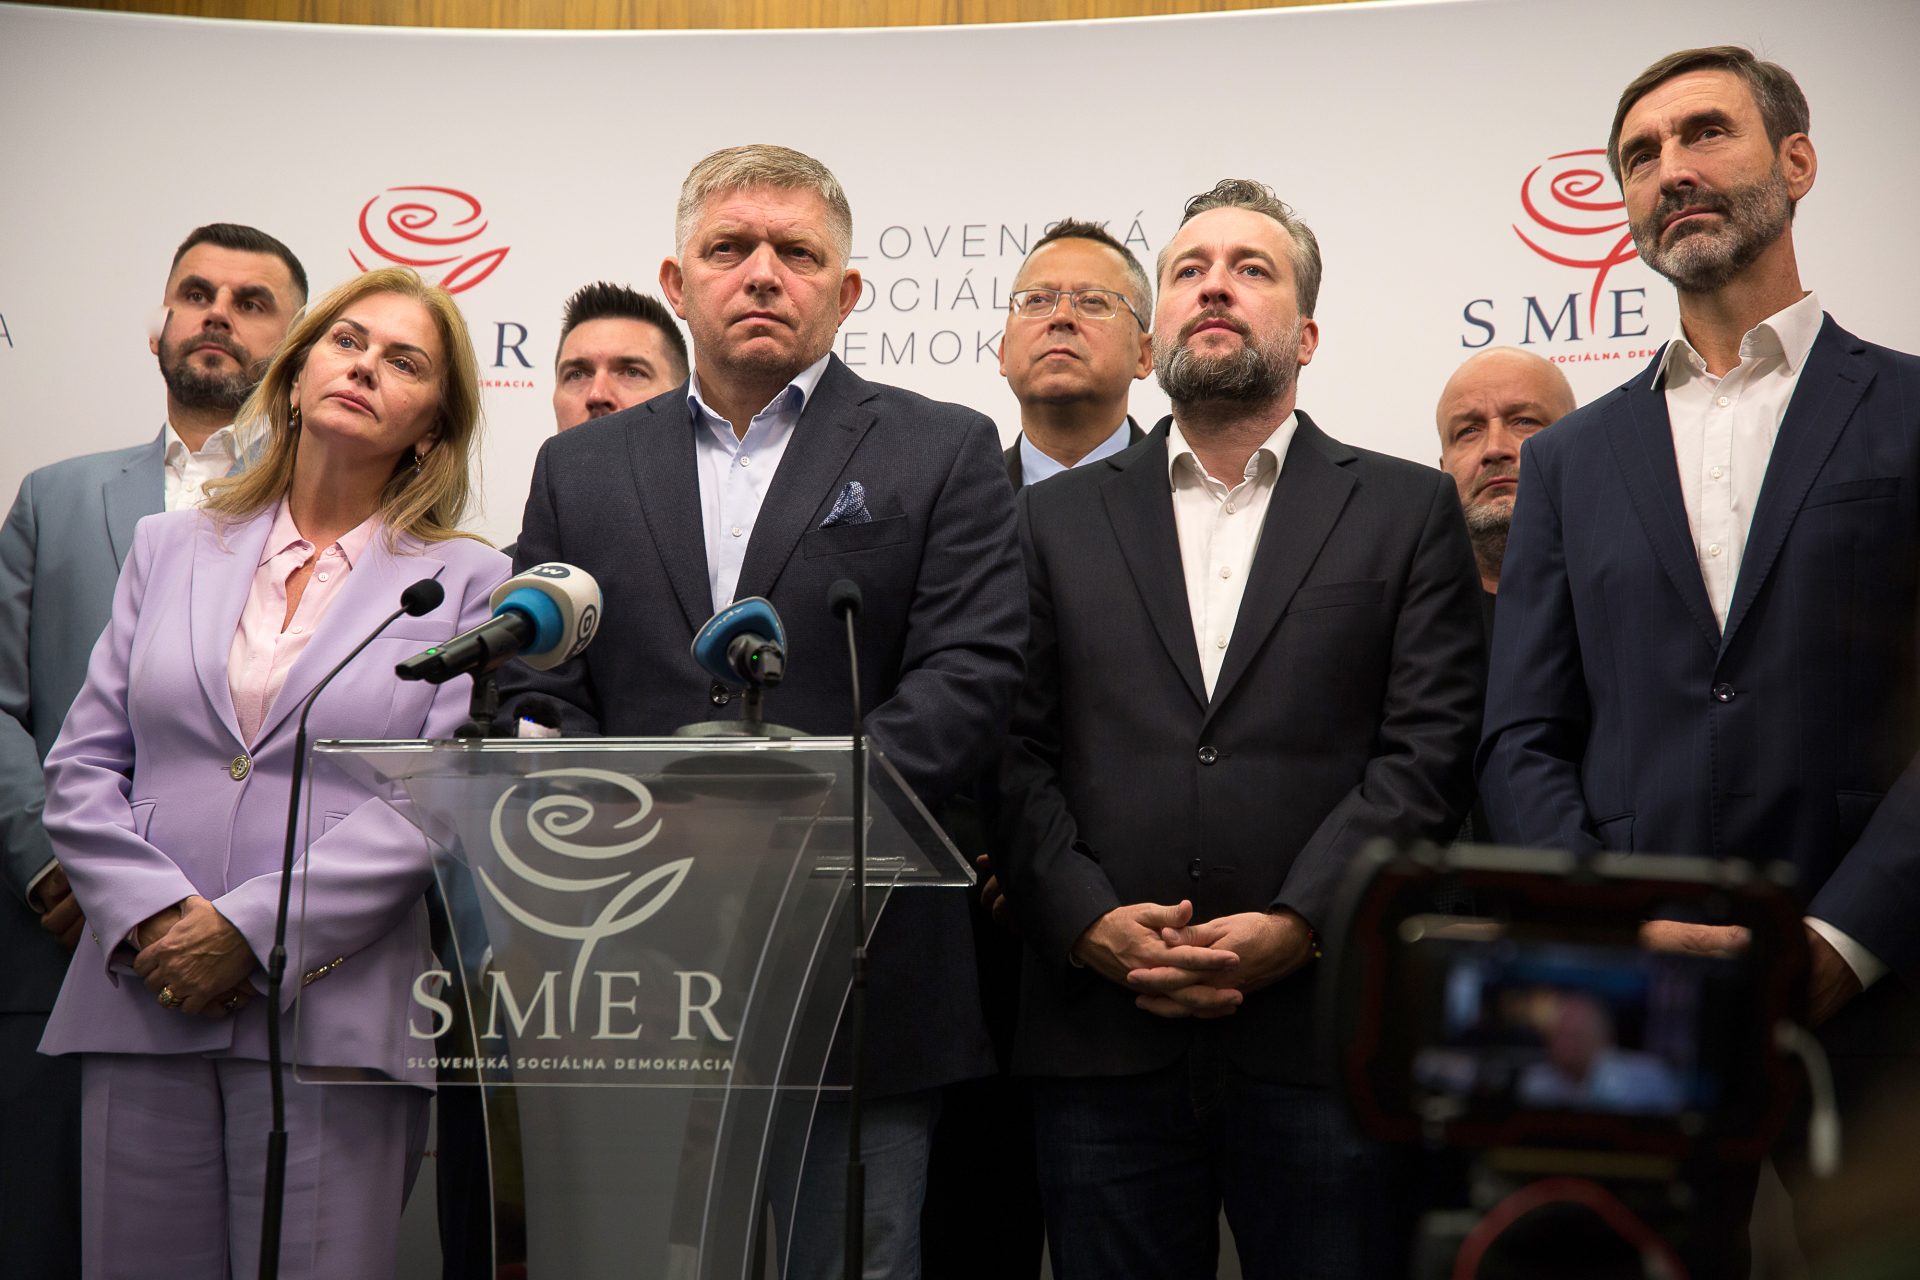 There's no party in Slovakia like Smer